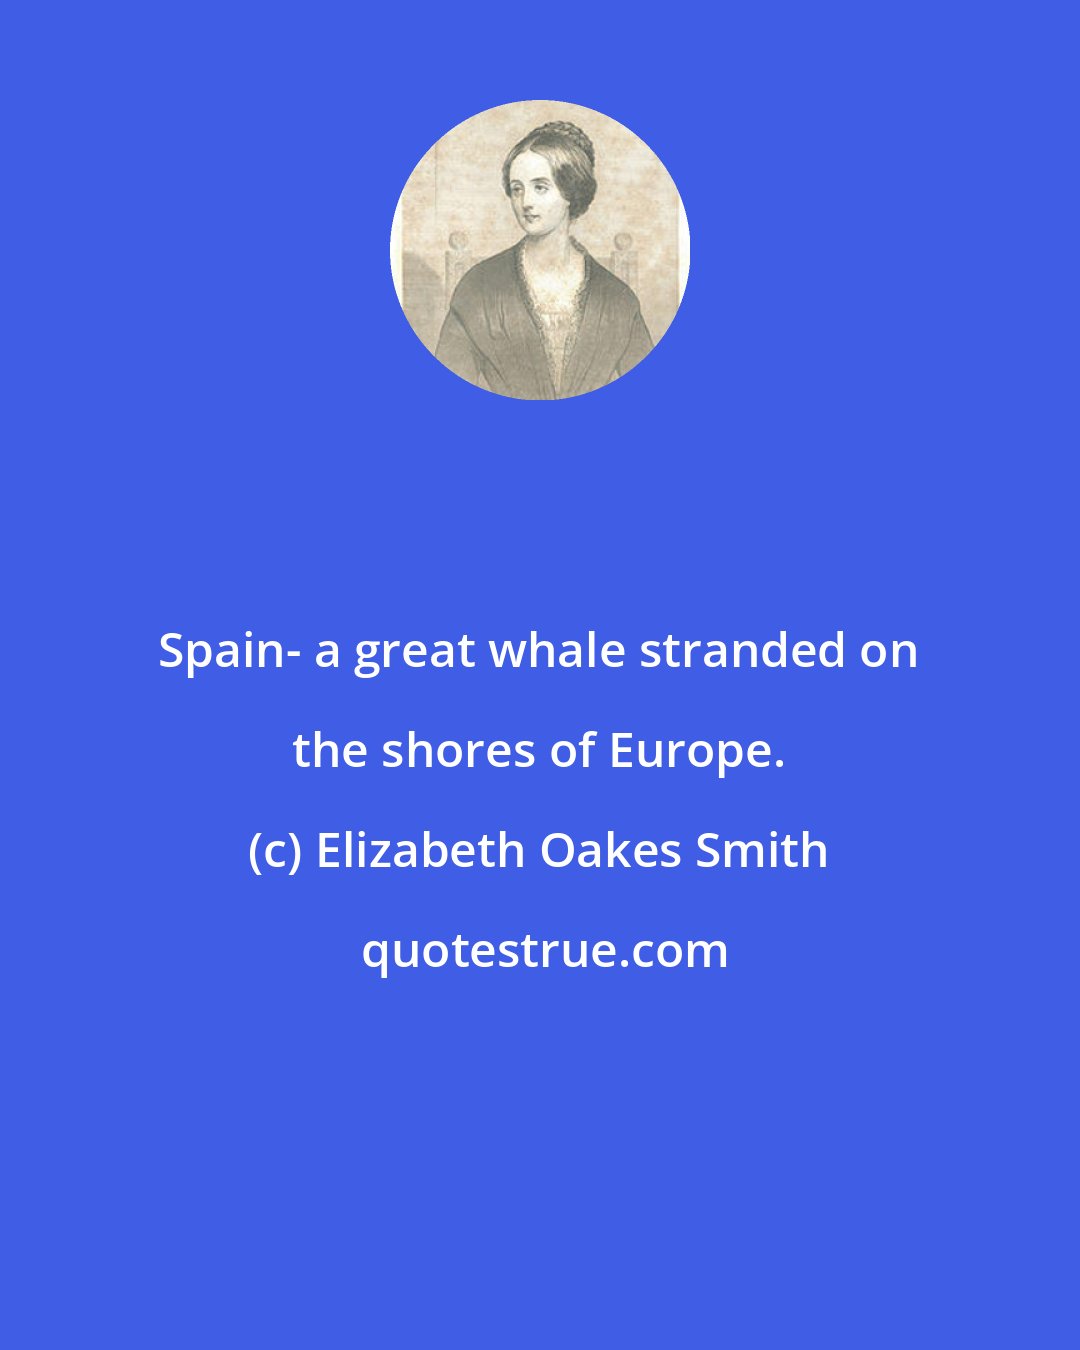 Elizabeth Oakes Smith: Spain- a great whale stranded on the shores of Europe.